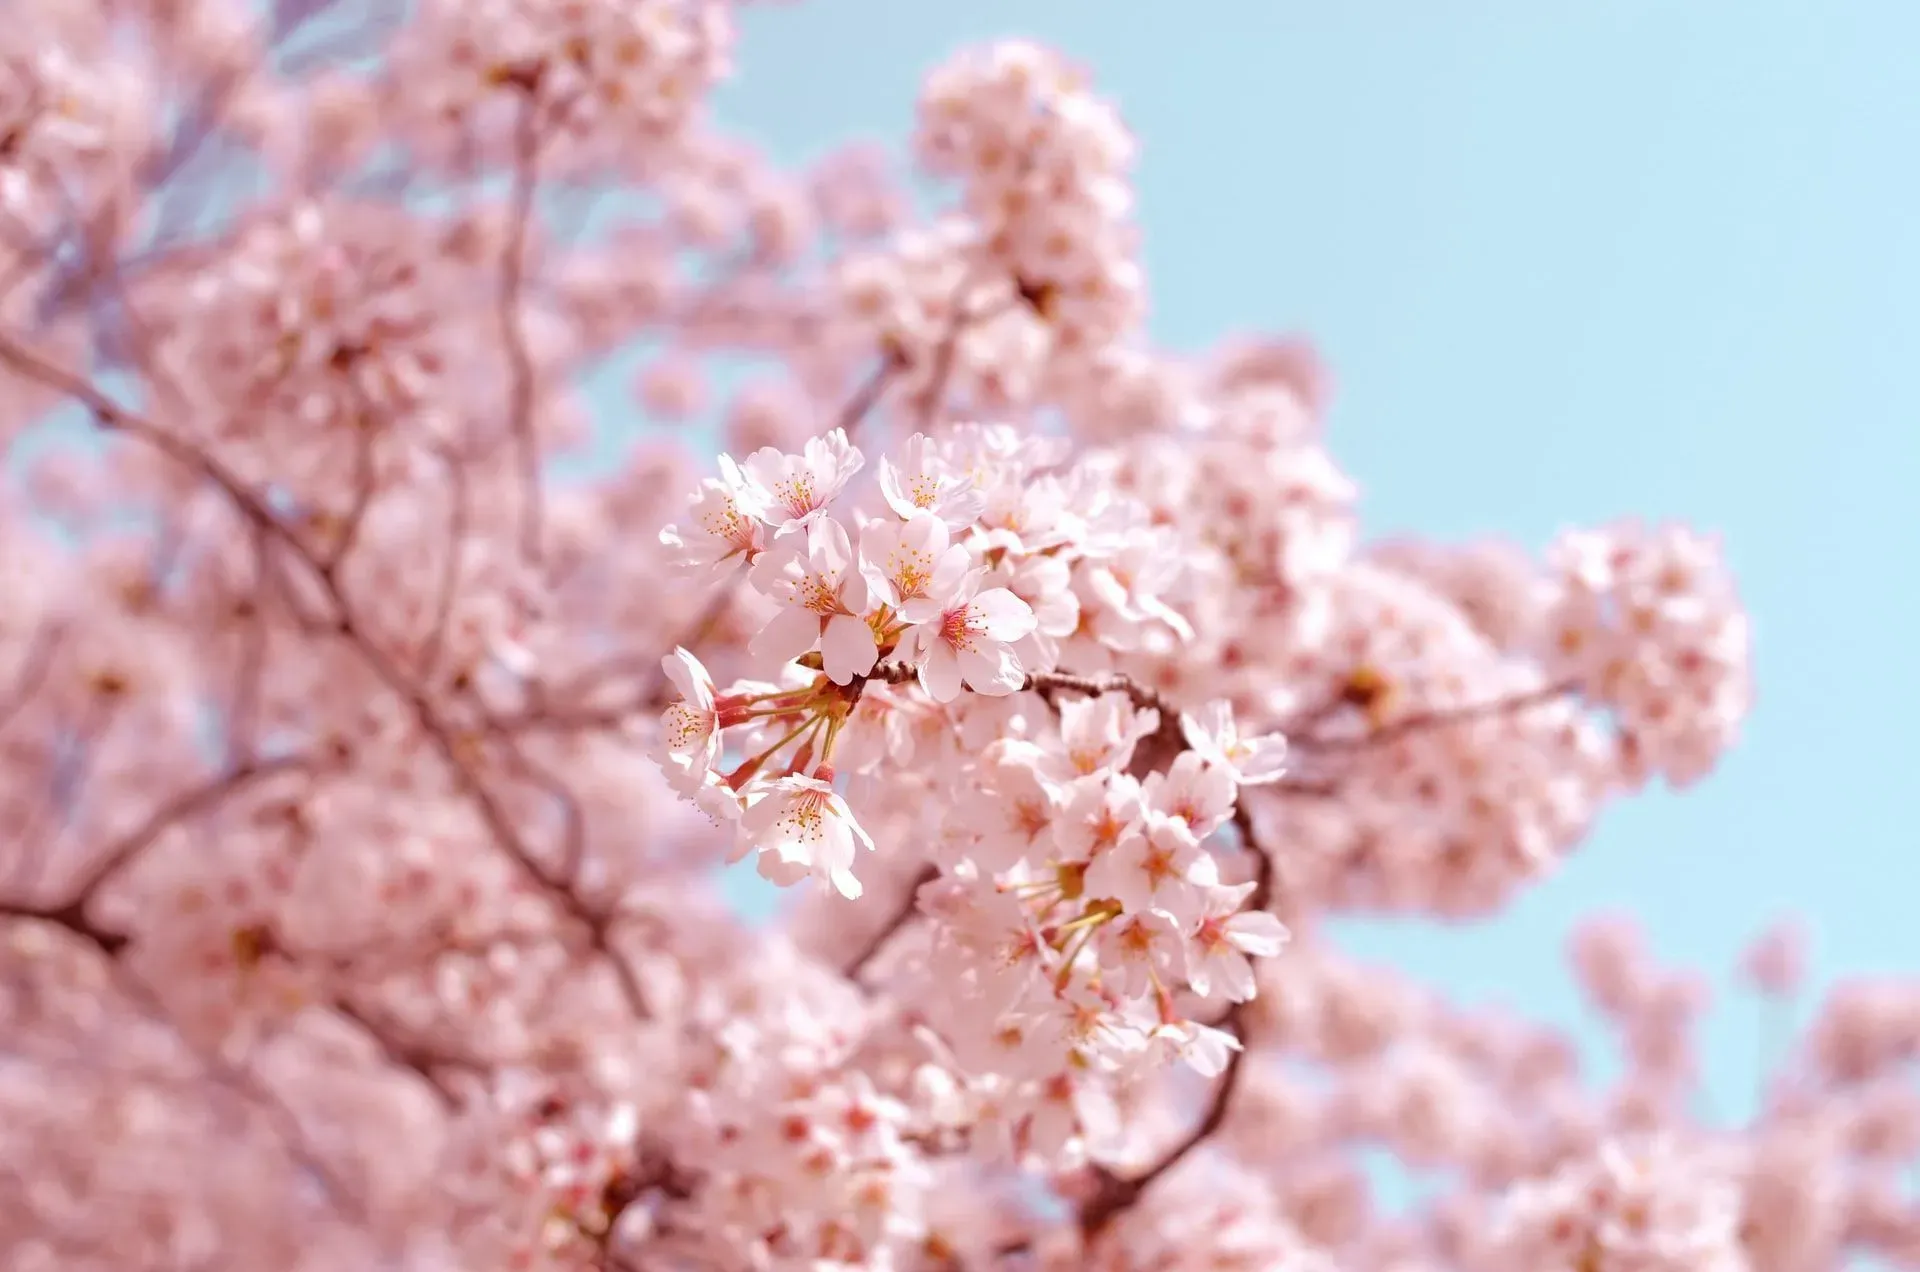 A cherry blossom flower comes in beautiful shades of pink.